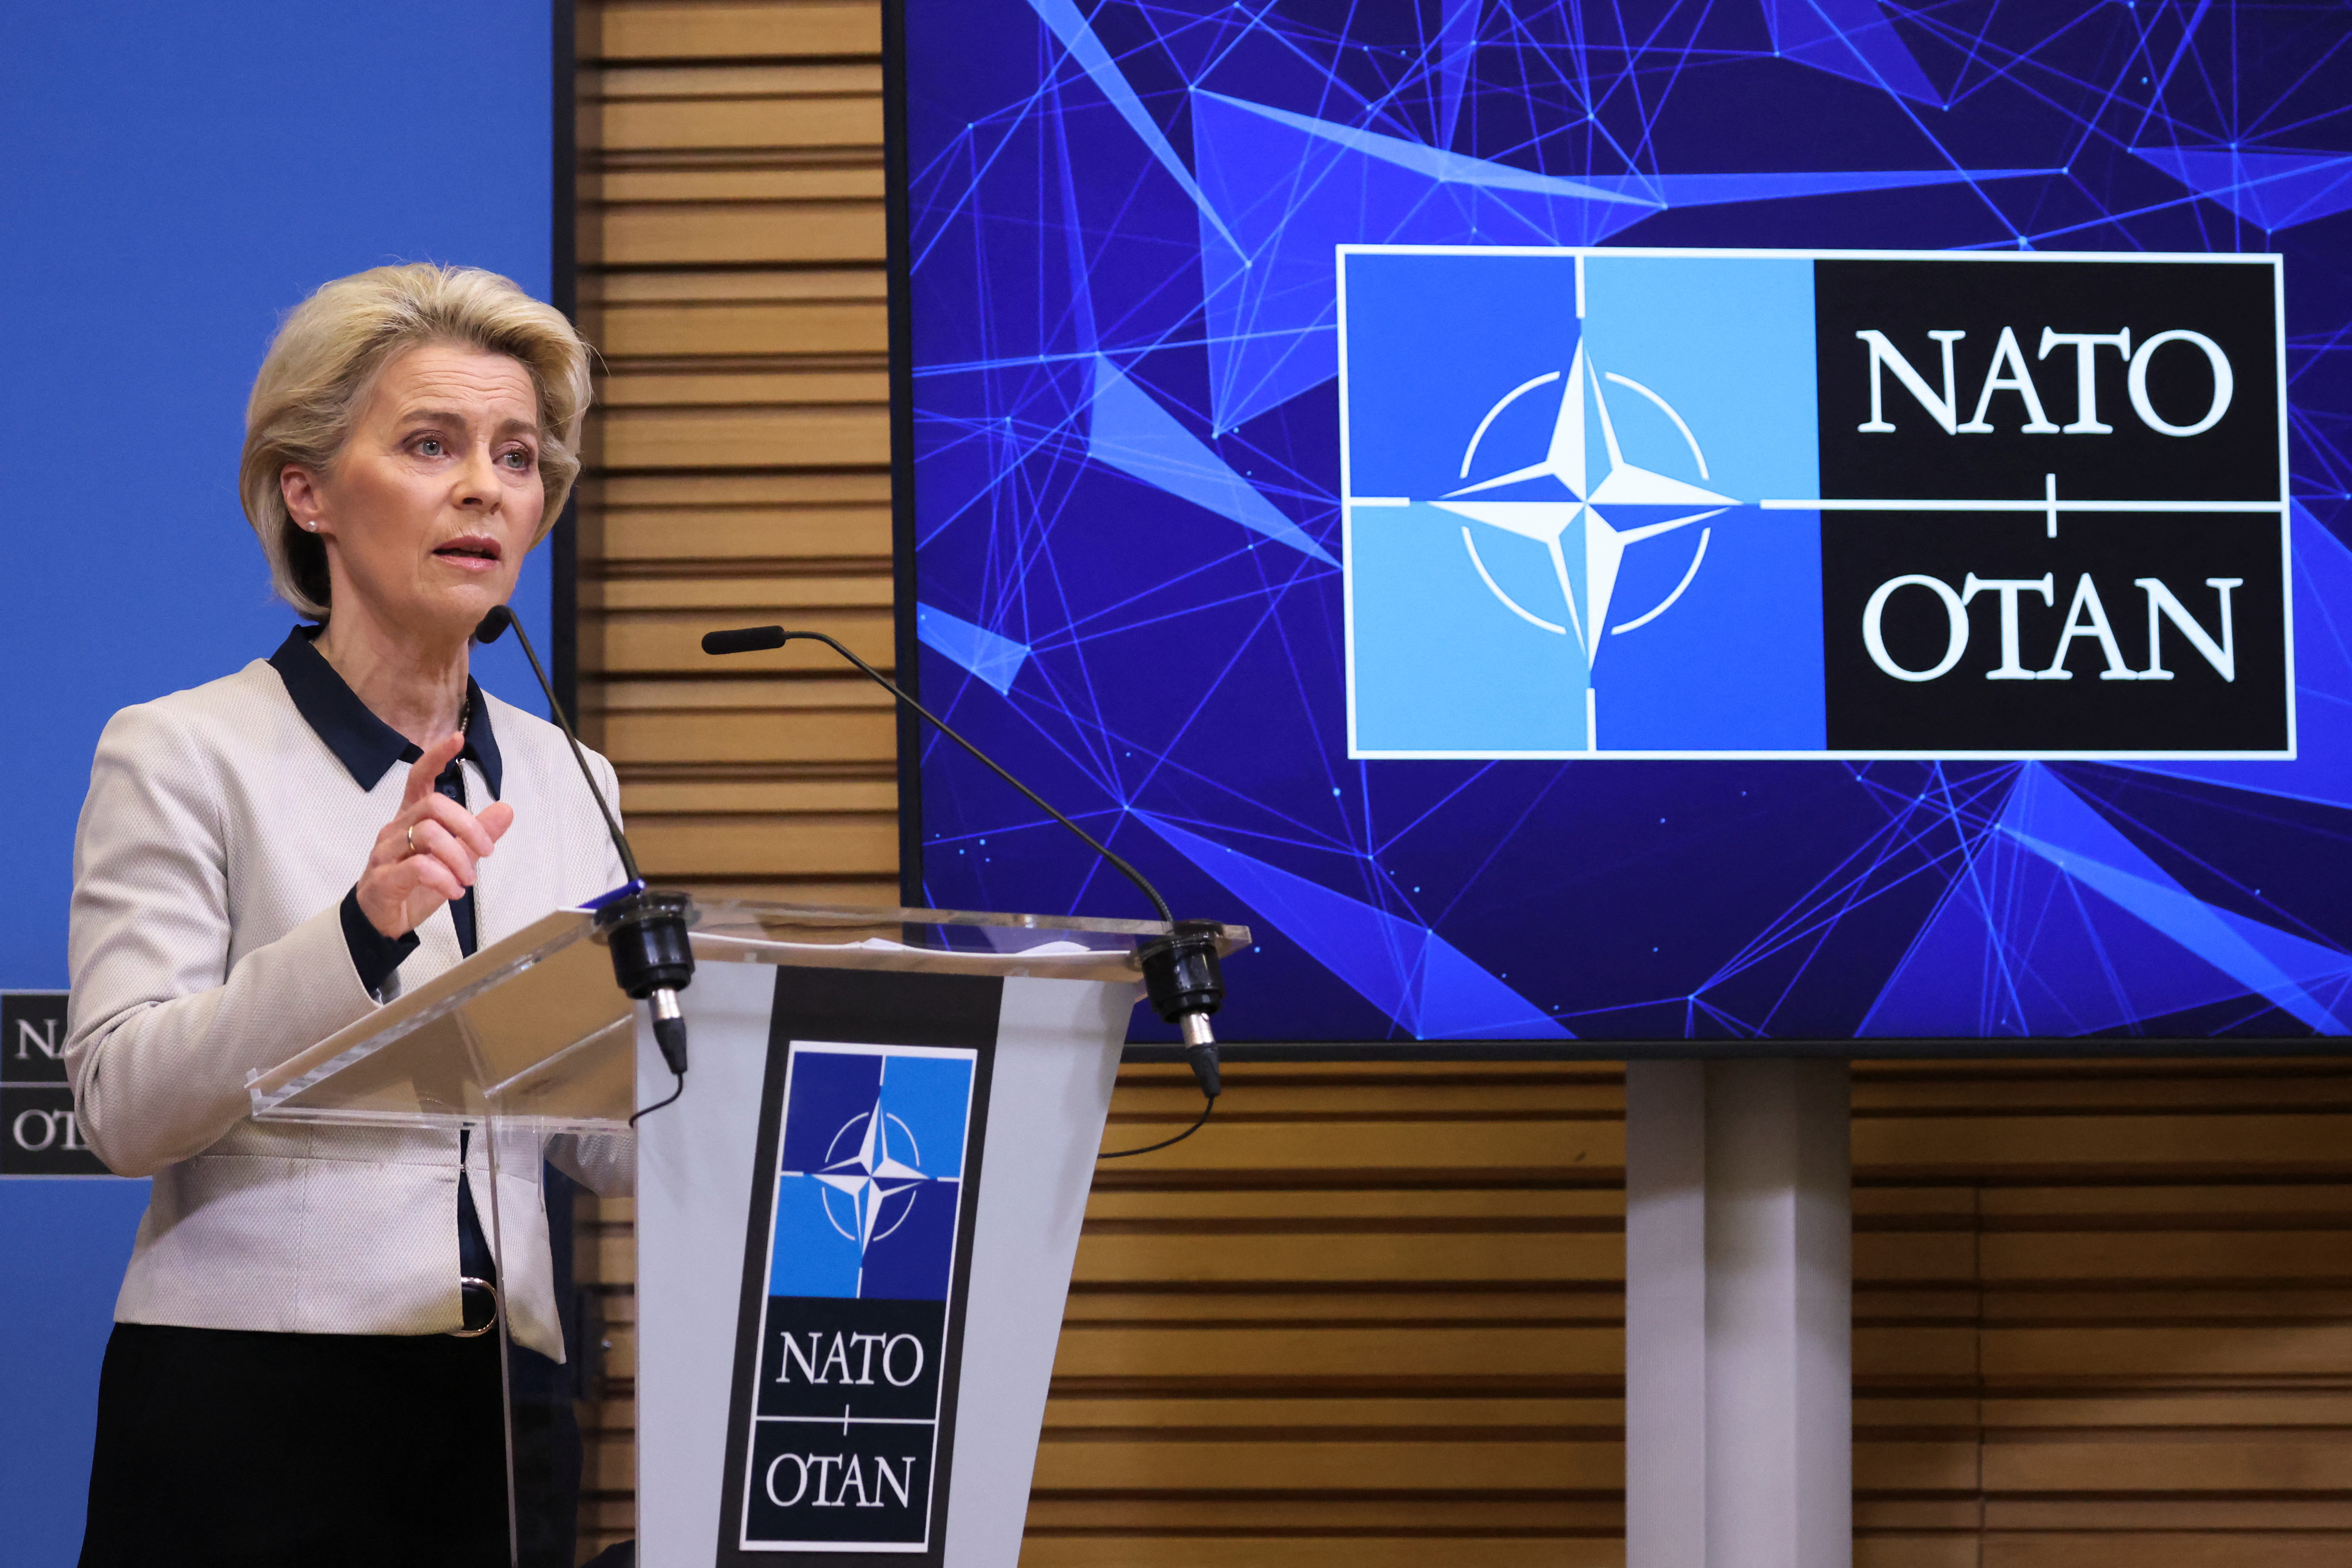 European Commission President Ursula von der Leyen speaks during a joint news conference, with European Council President Charles Michel and NATO Secretary General Jens Stoltenberg, on Russia's attack on Ukraine, in Brussels, Belgium February 24, 2022. REUTERS/Yves Herman